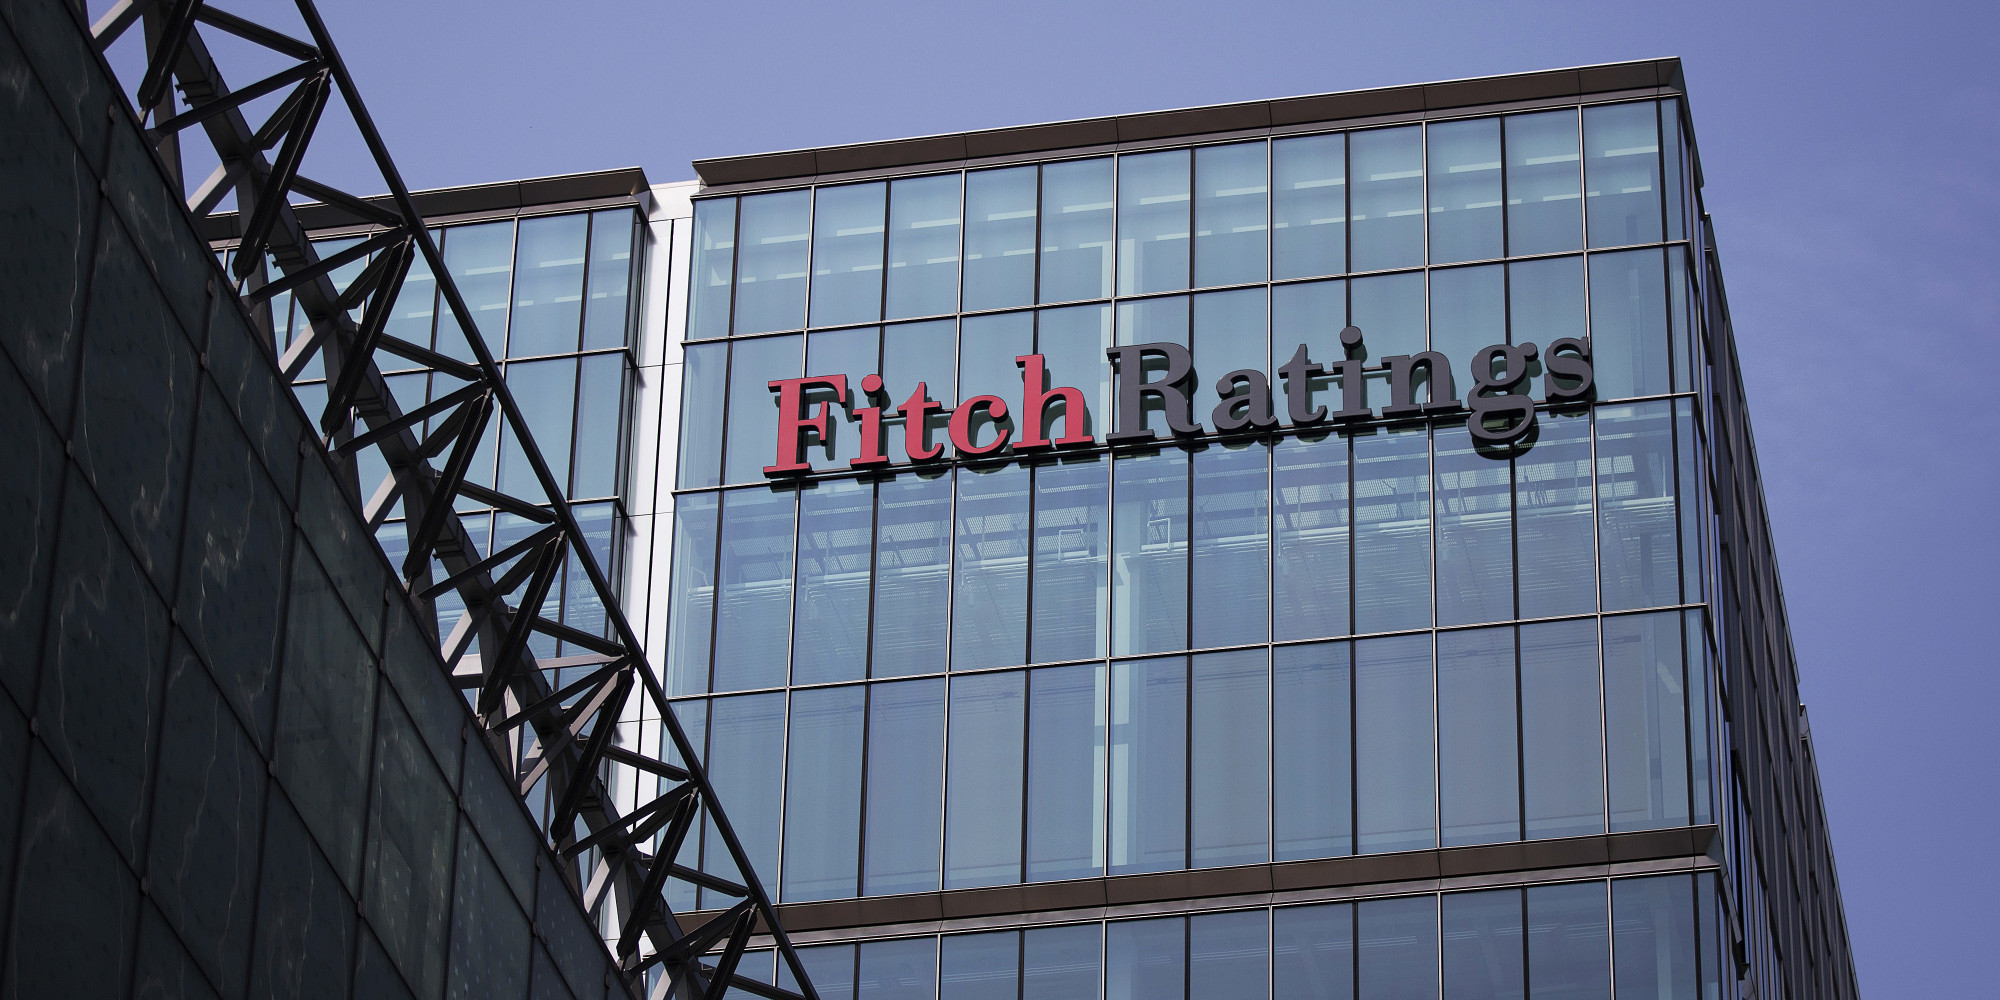 The headquarters of Fitch Ratings Ltd. stands in the Canary Wharf business and shopping district in London, U.K., on Friday, July 12, 2013. Recent data suggest Britain's economic recovery is gaining momentum after a return to growth in the first quarter. Photographer: Simon Dawson/Bloomberg via Getty Images